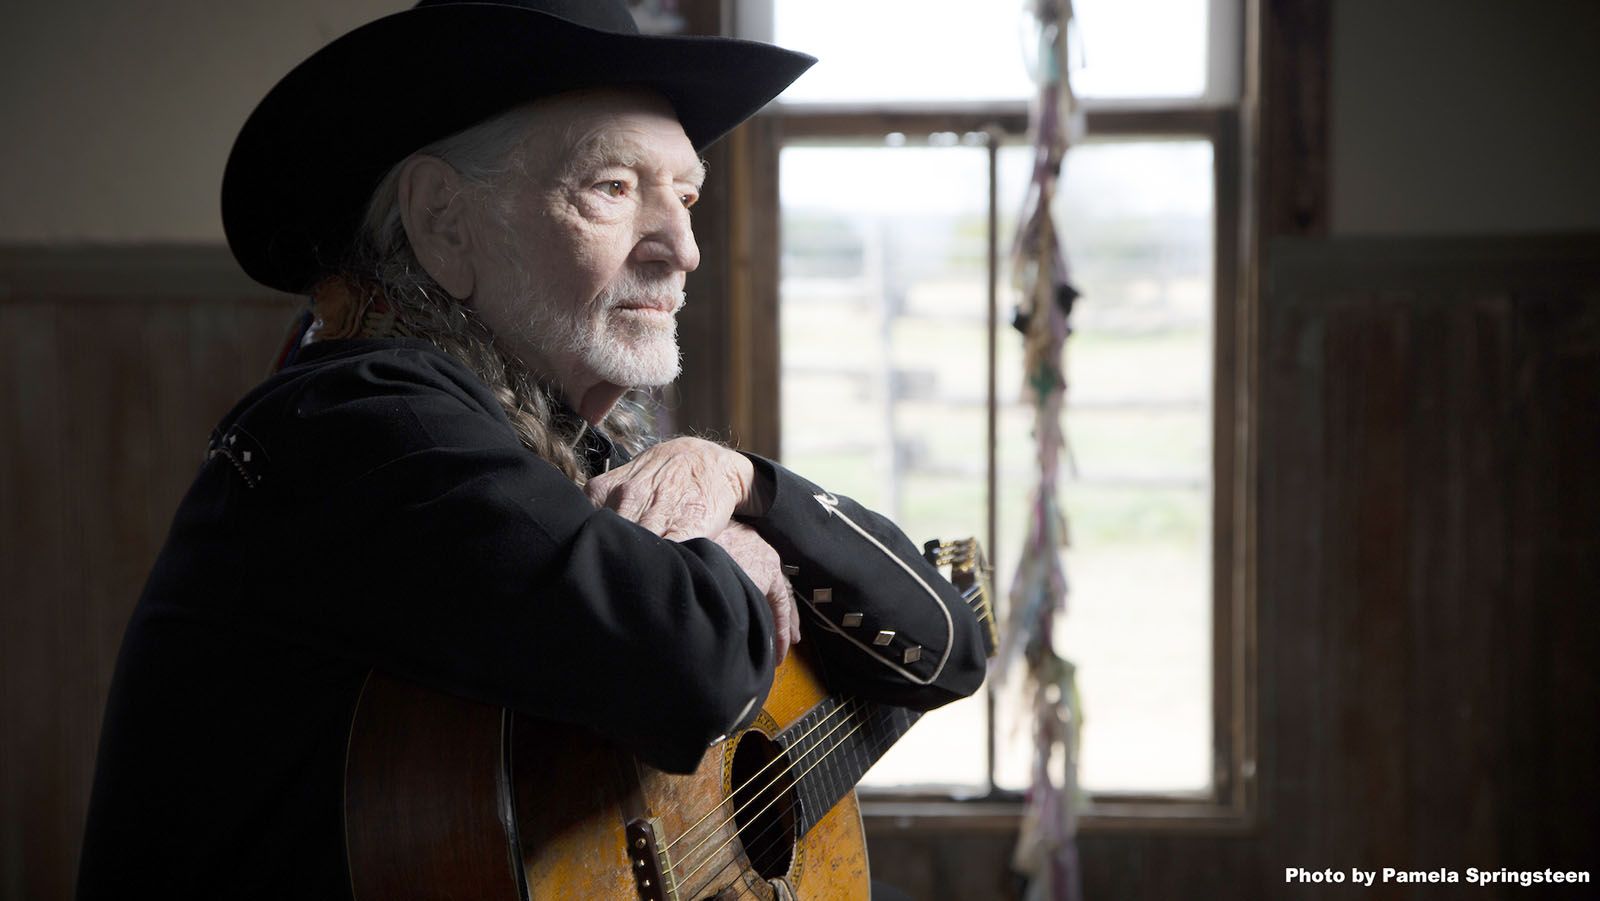 Willie Nelson will be at Ruoff Music Center for Farm Aid.